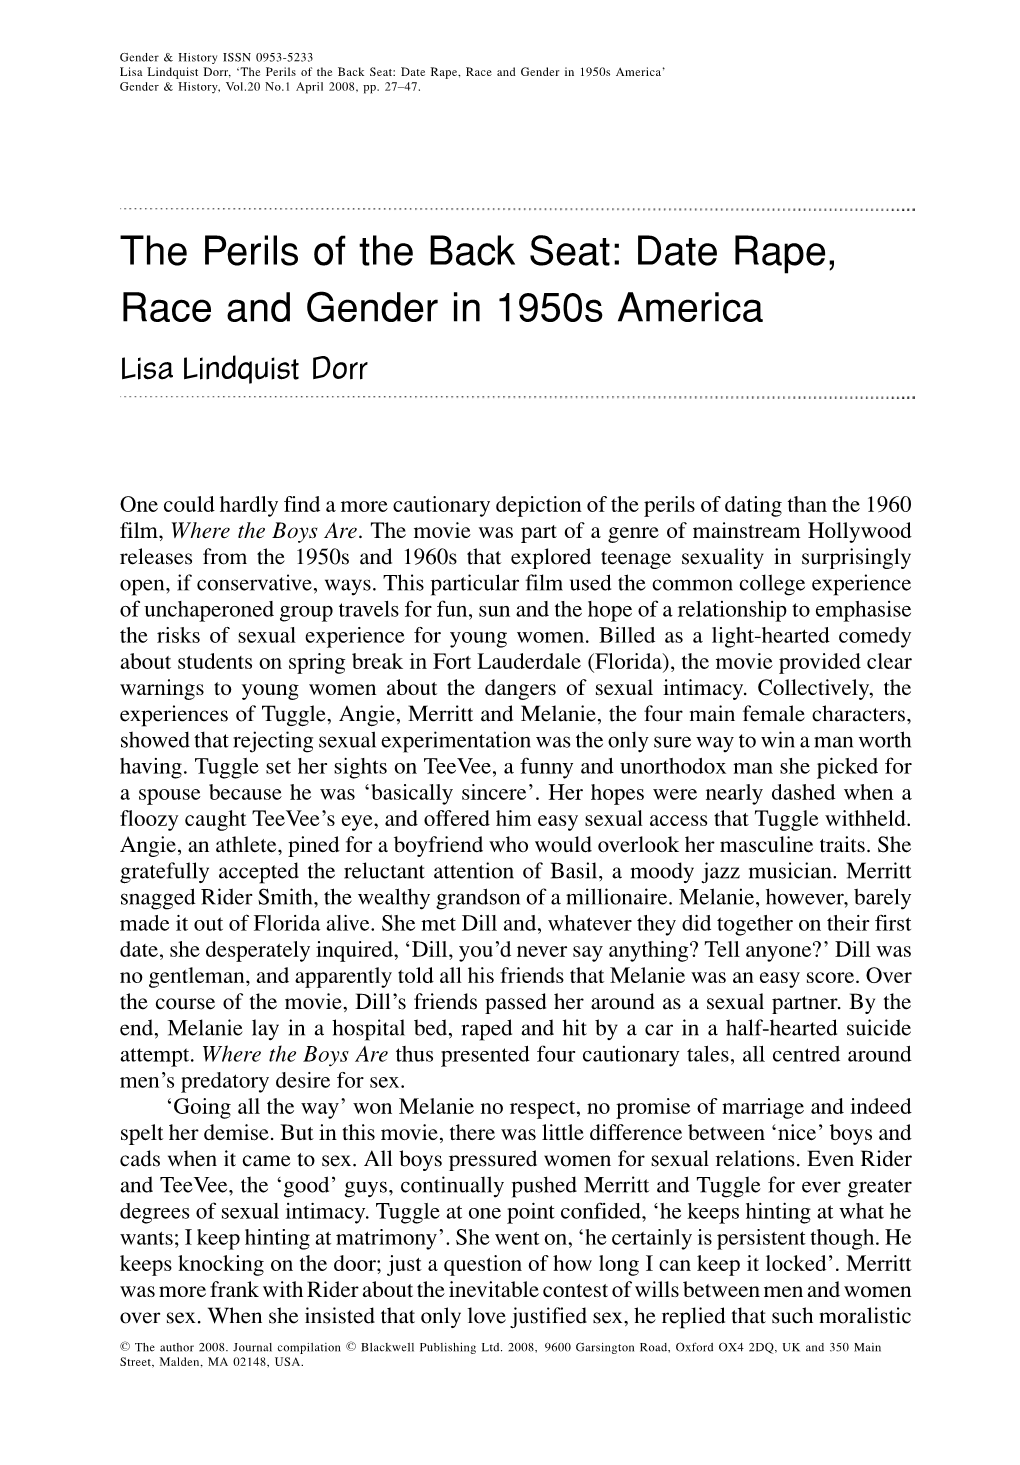 The Perils of the Back Seat: Date Rape, Race and Gender in 1950S America’ Gender & History, Vol.20 No.1 April 2008, Pp